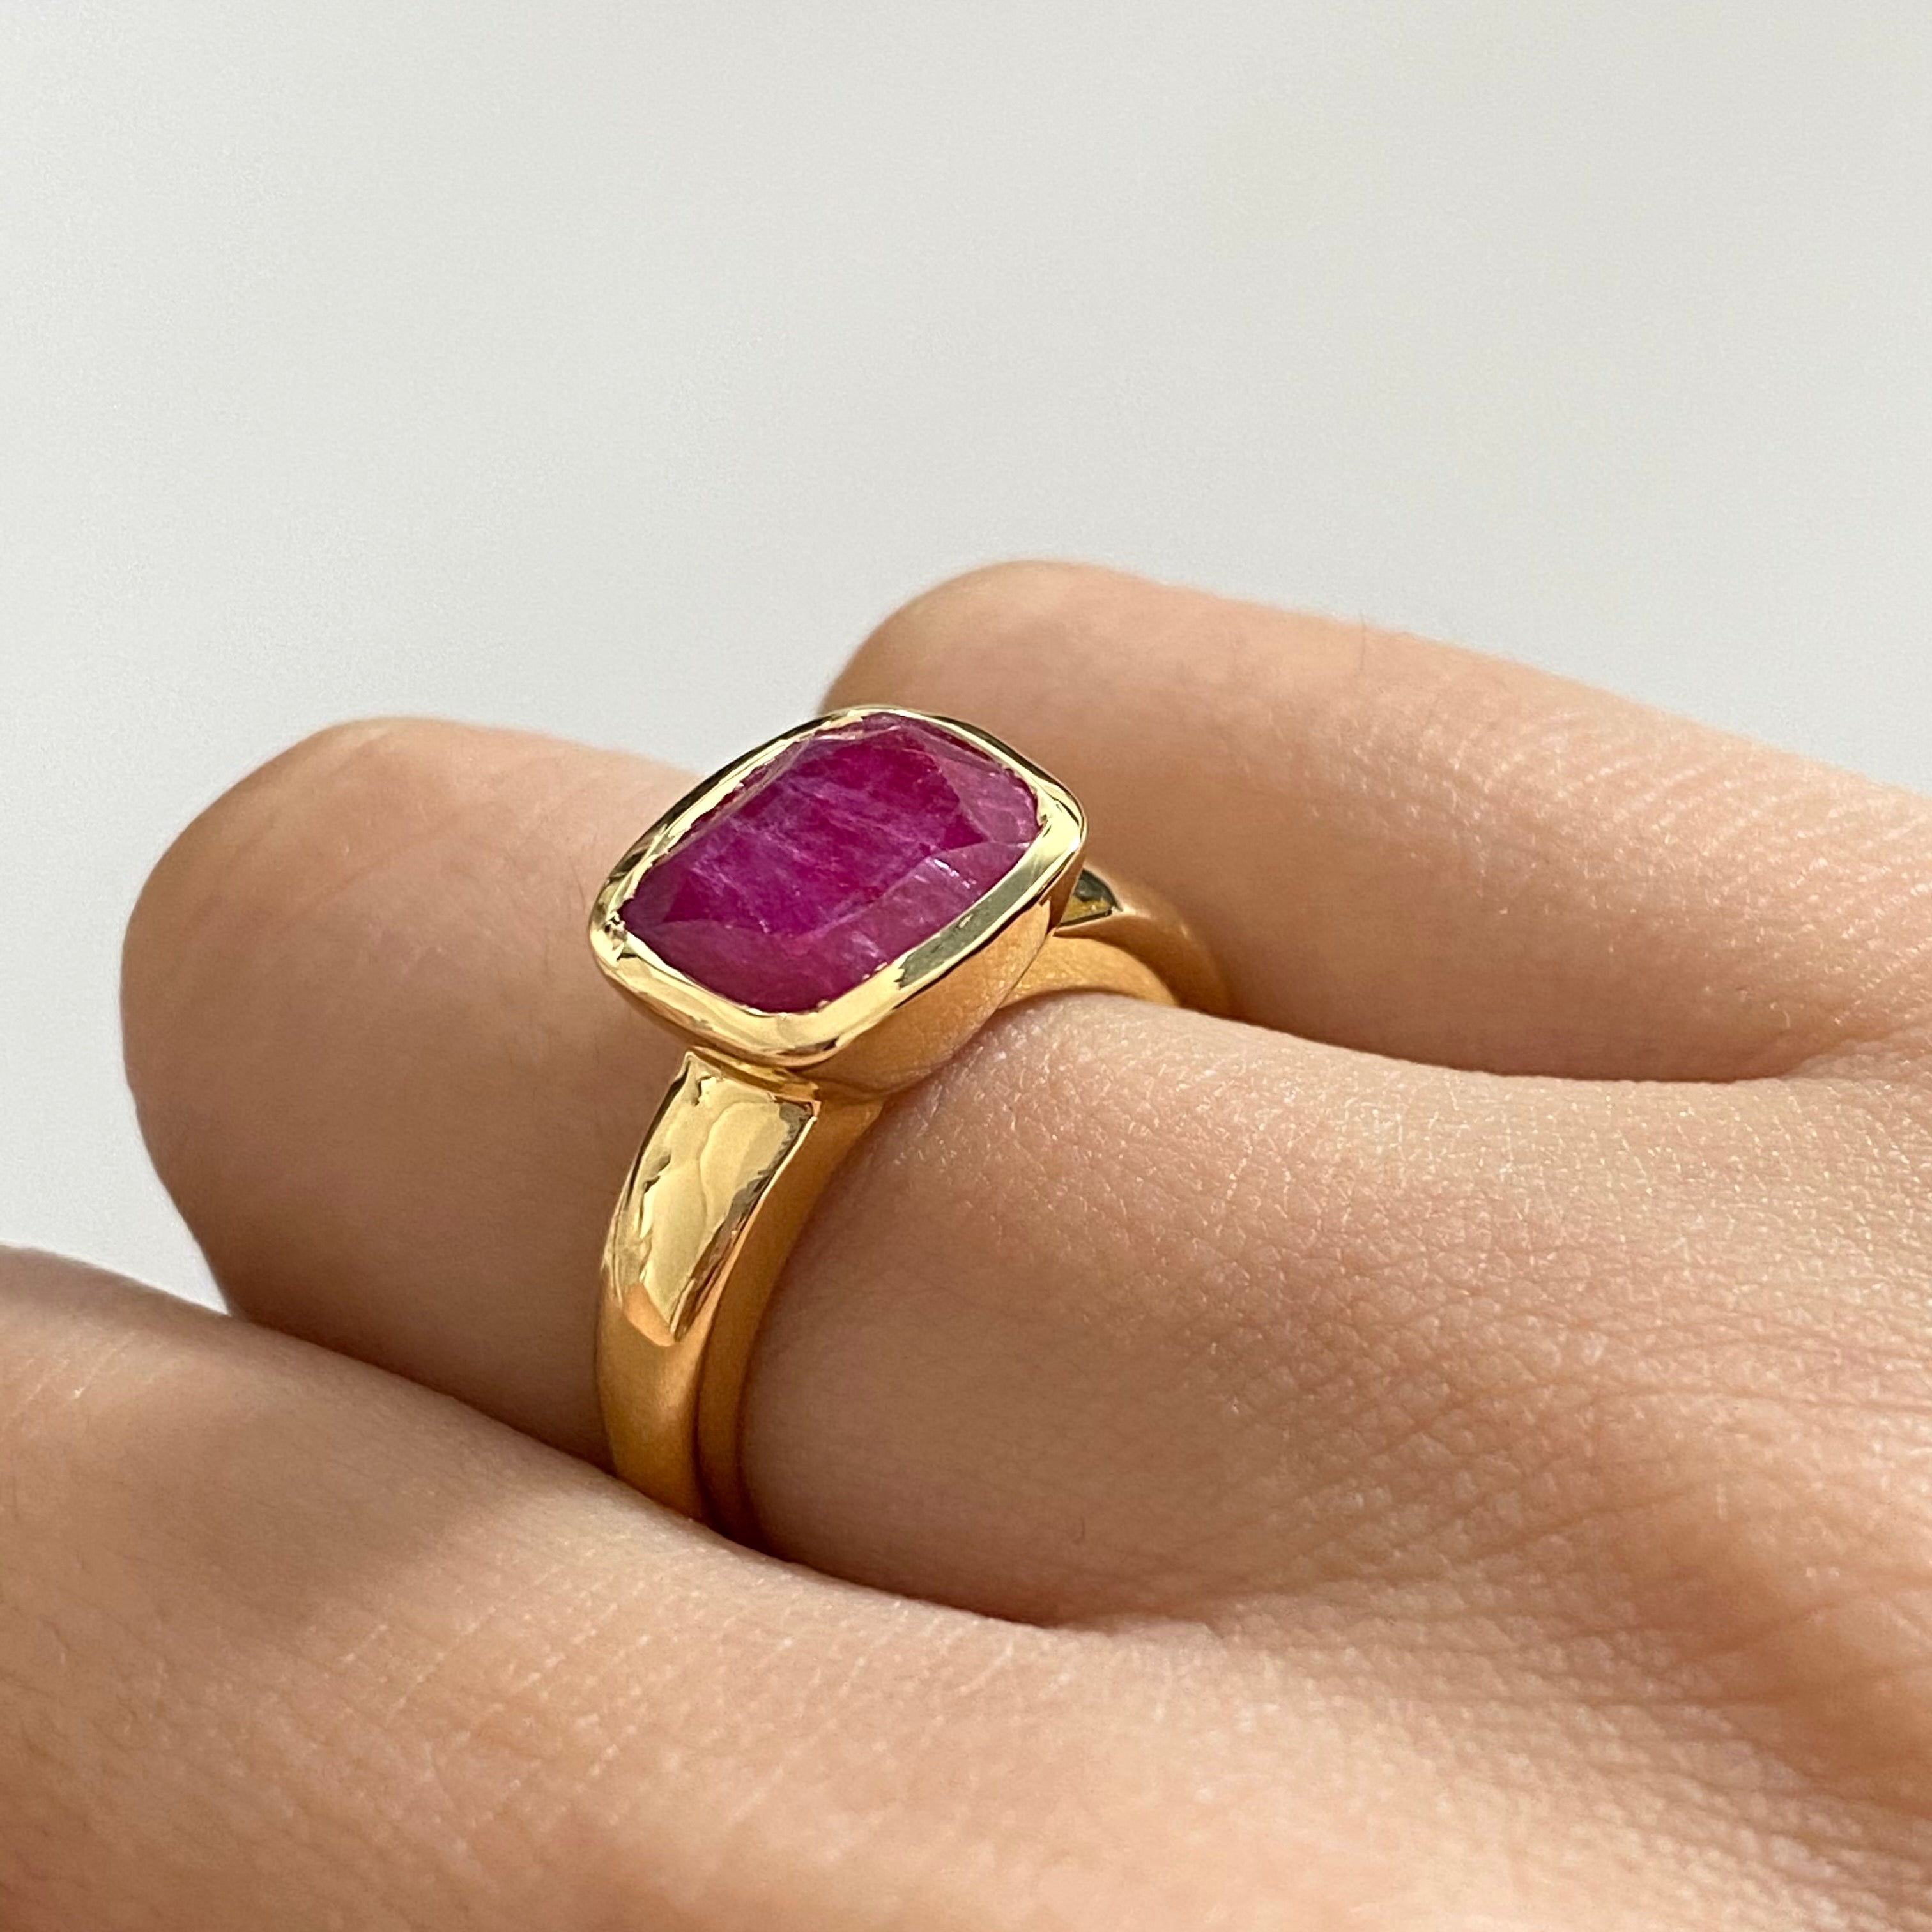 Faceted Rectangular Cut Natural Gemstone Gold Plated Sterling Silver Ring - Ruby Quartz